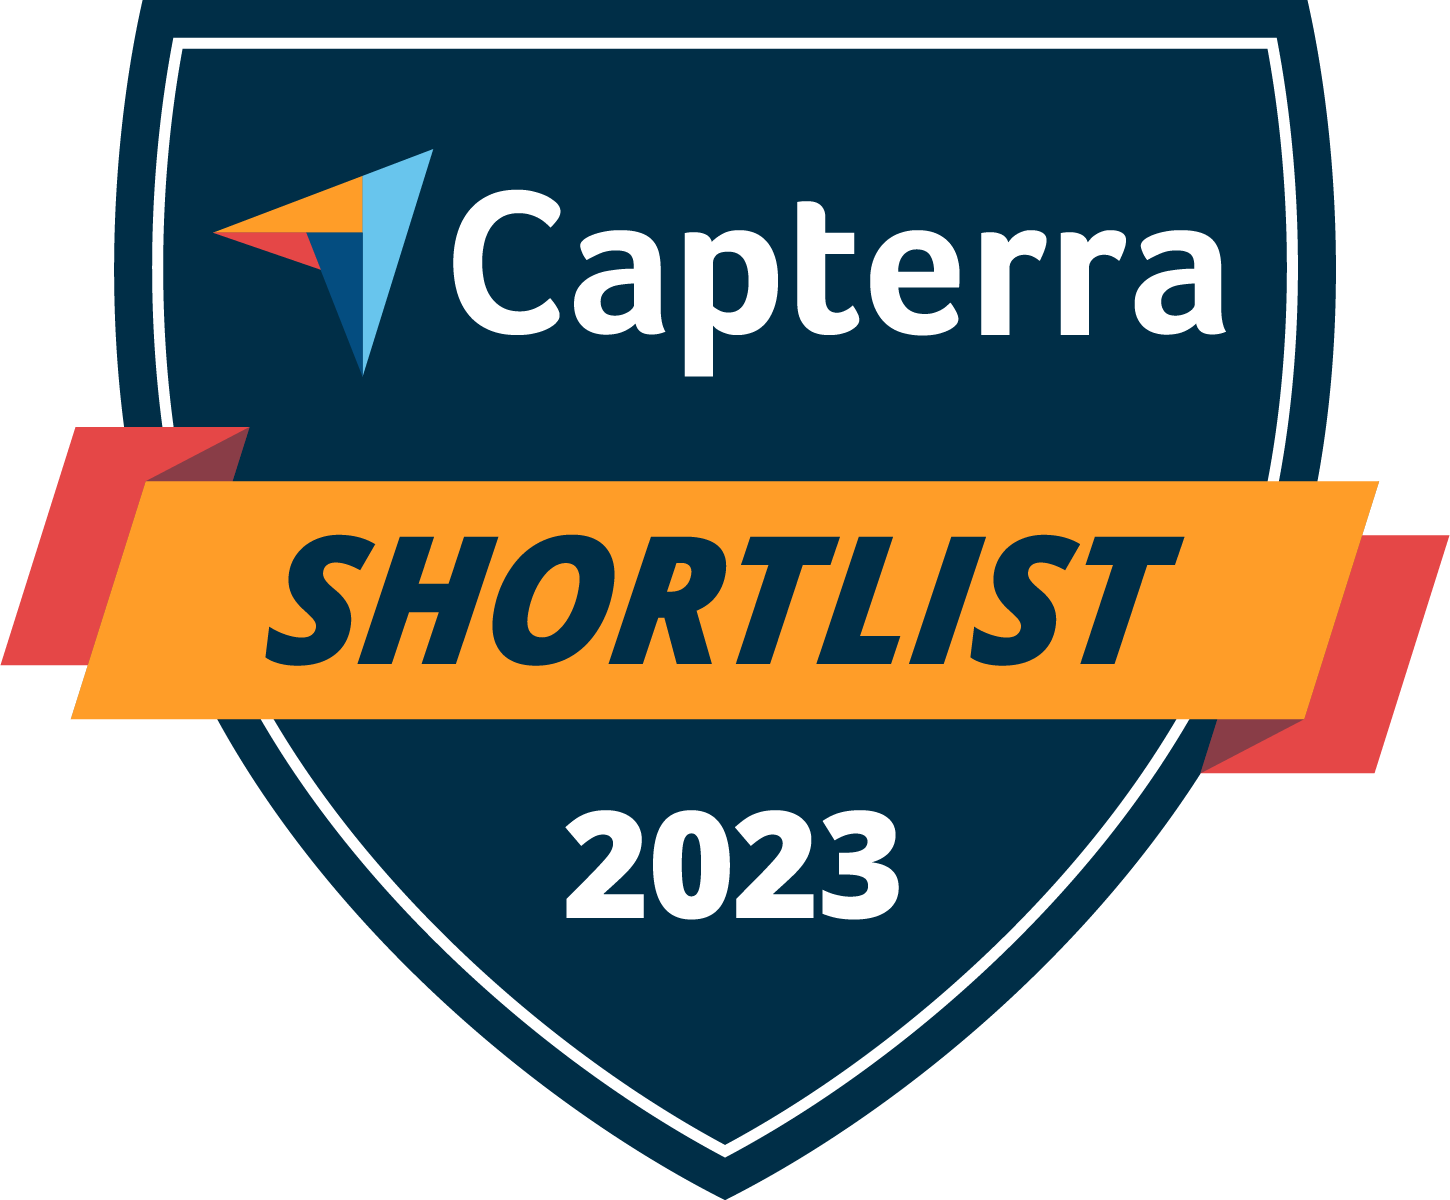 QuoteWerks was named to Capterra's Shortlist of top proposal and quoting software products for 2023